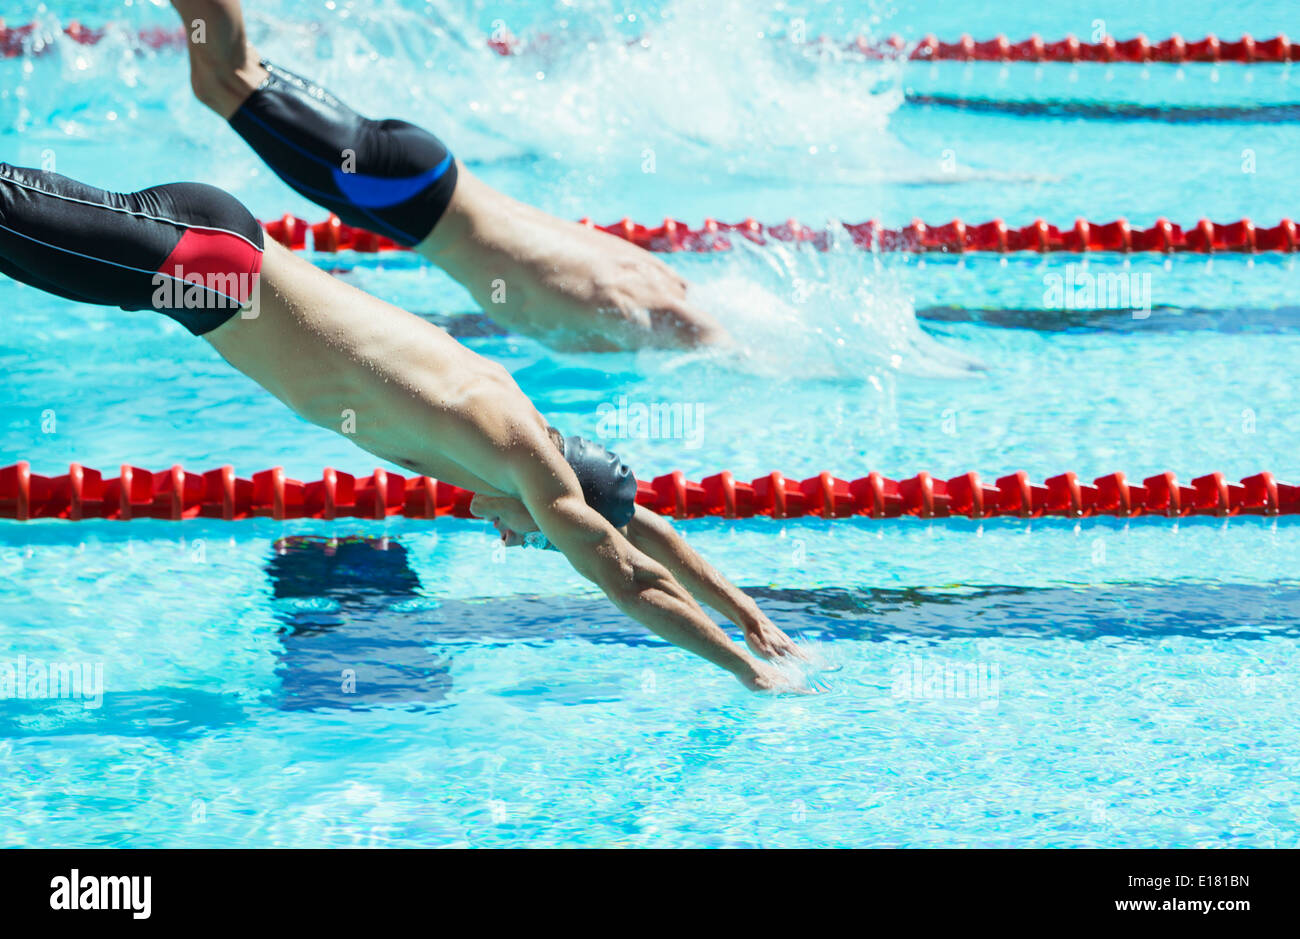 Swimmers diving into pool Stock Photo